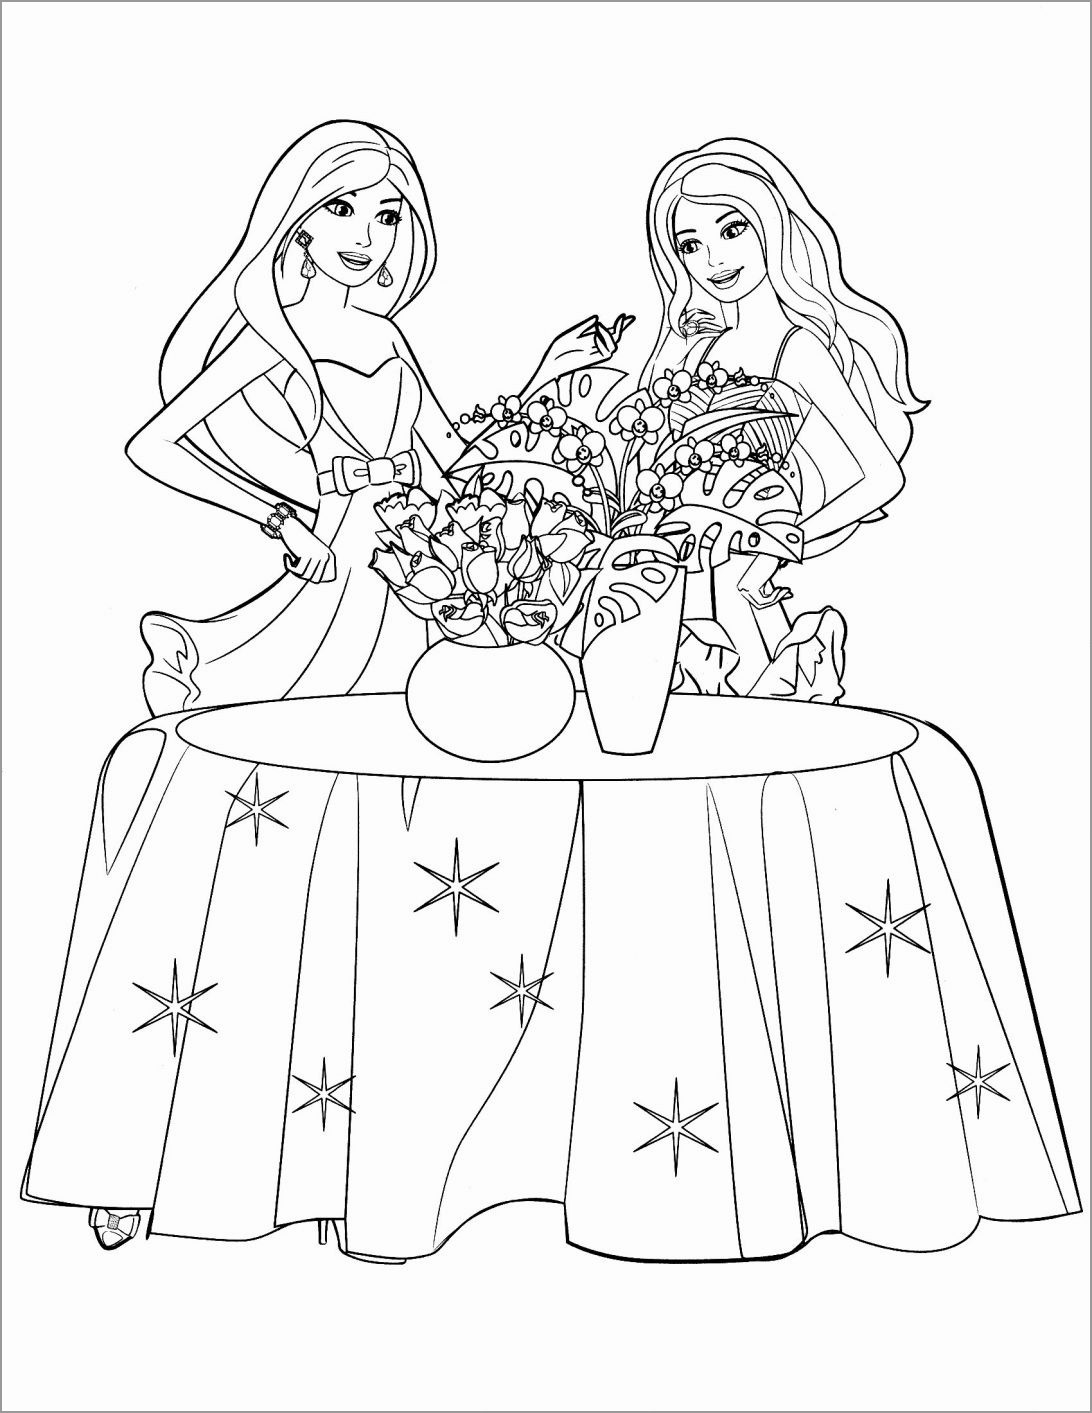 Printable Barbie Coloring Page for Adults   ColoringBay